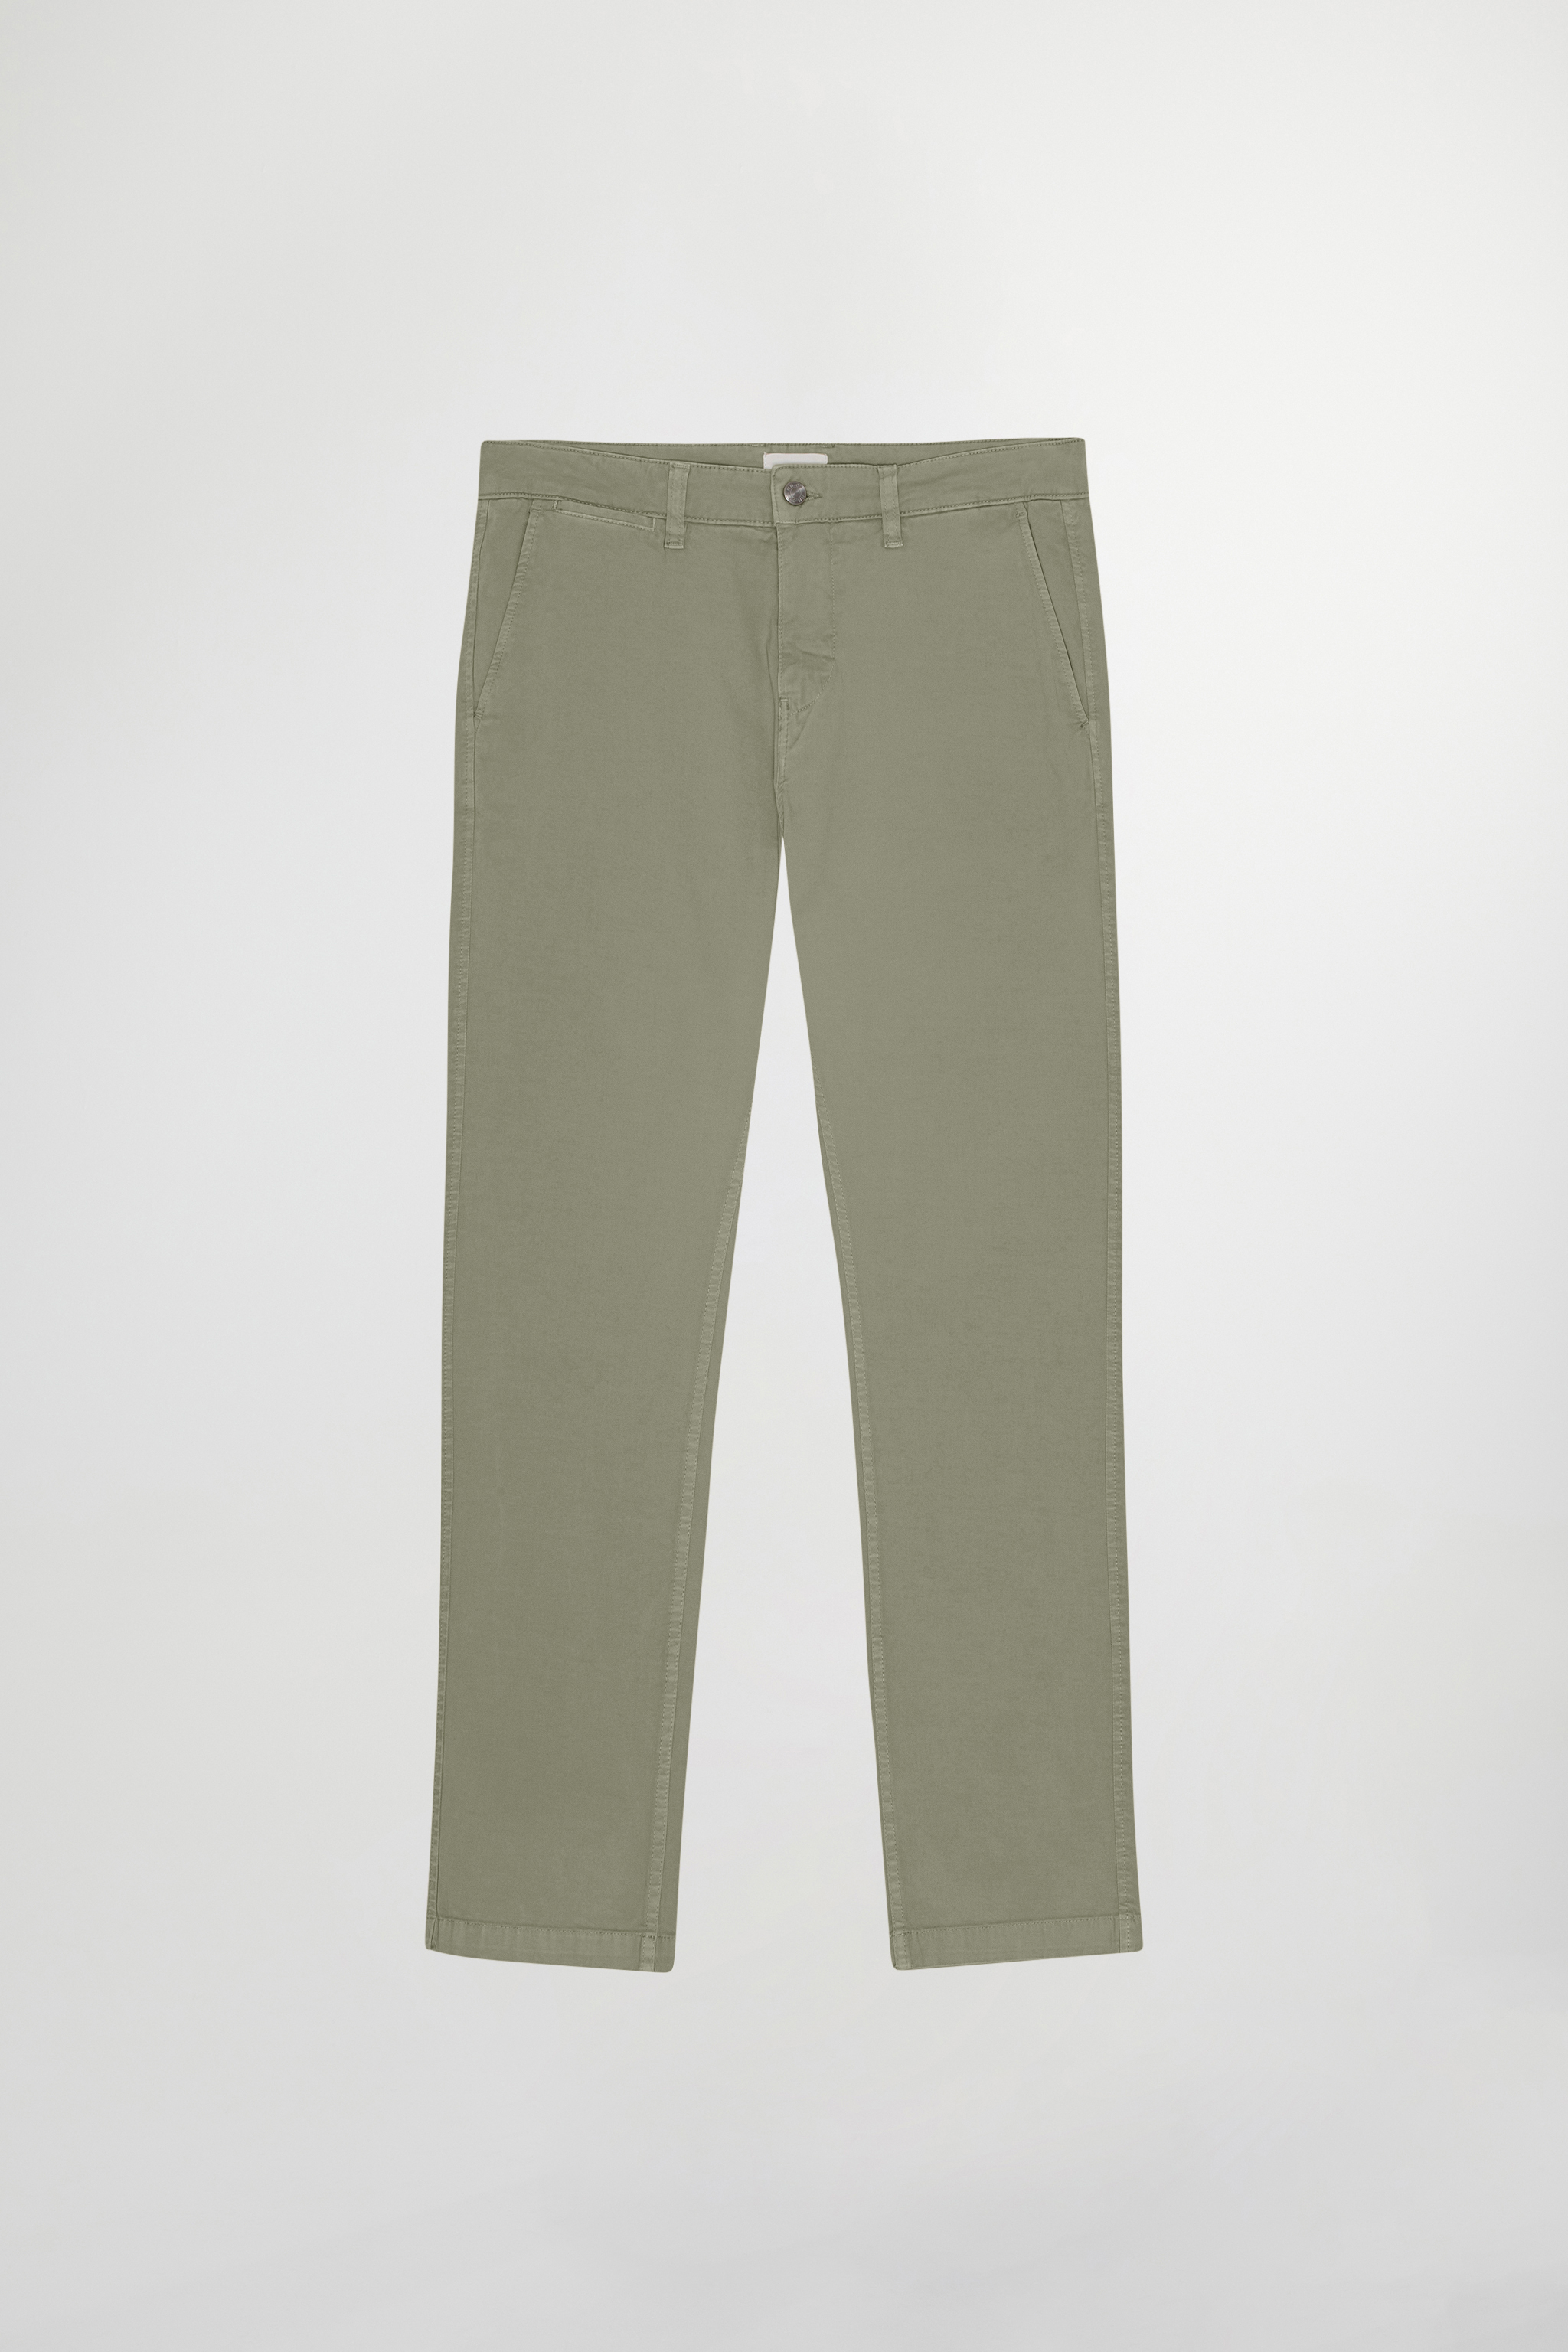 Marco 1400 men's chinos - Green - Buy online at NN.07®